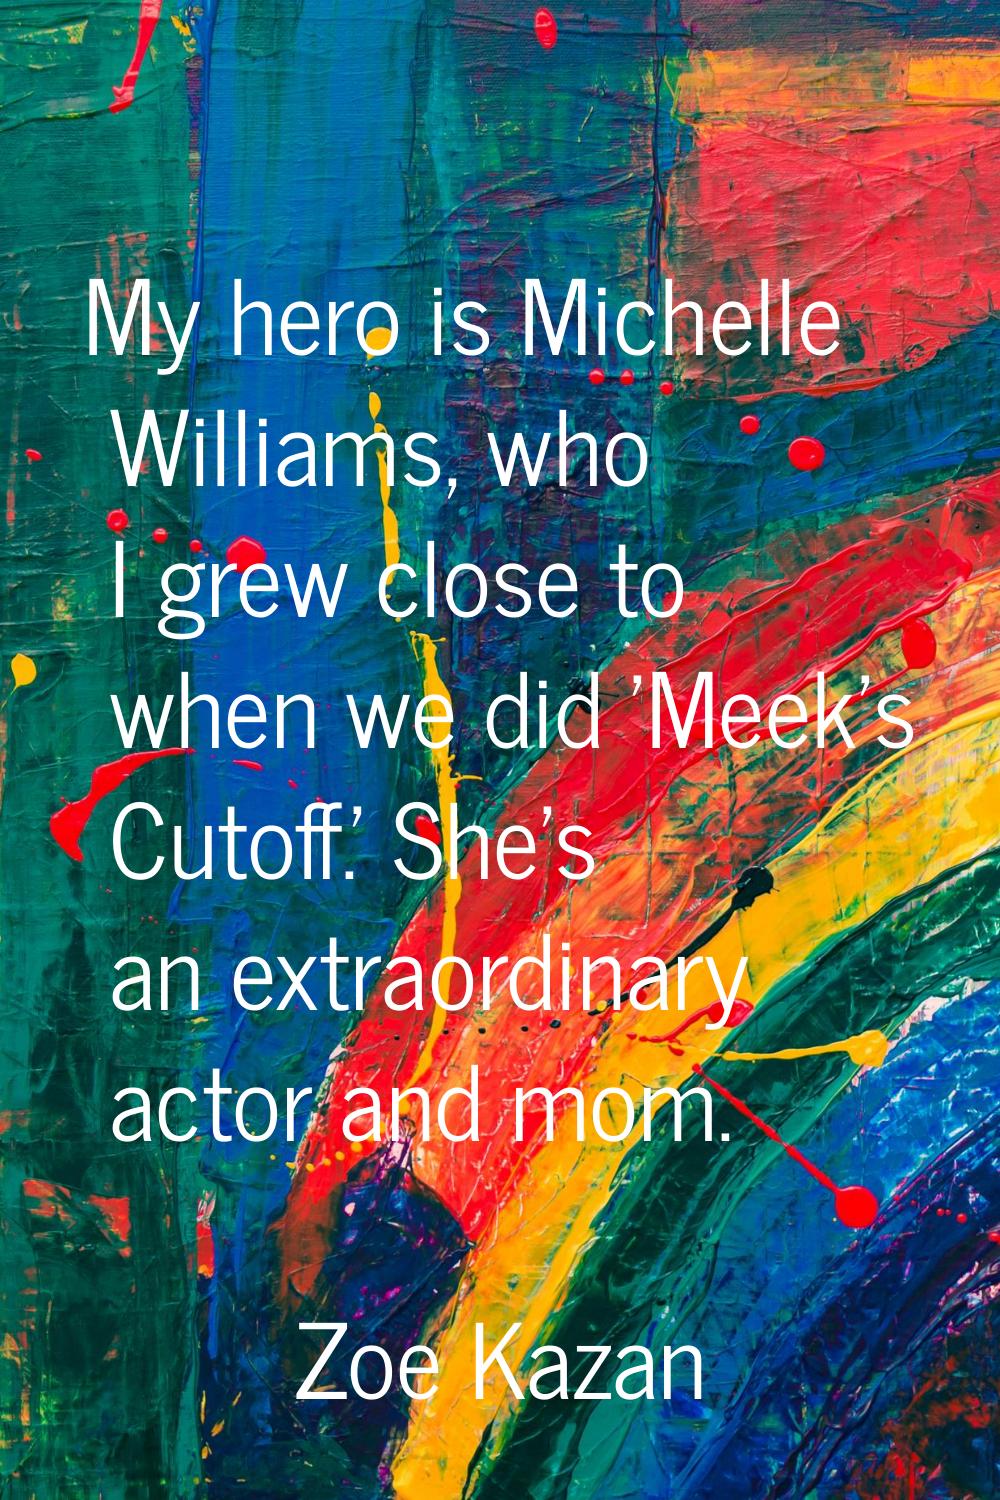 My hero is Michelle Williams, who I grew close to when we did 'Meek's Cutoff.' She's an extraordina